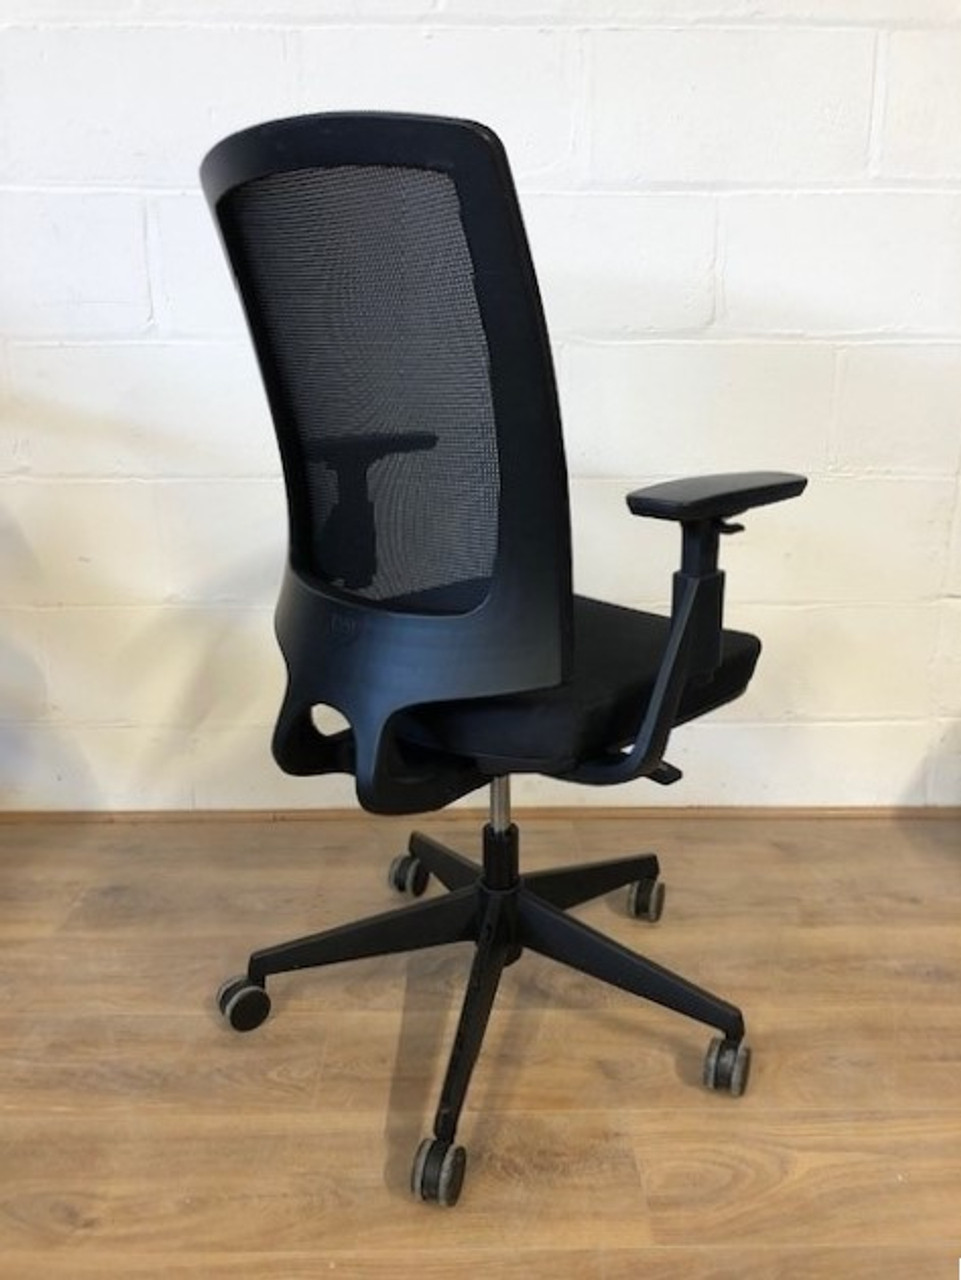 Hon Lota chairs_second hand office chairs to buy essex_used office furniture chelmsford essex_hon chairs to buy used essex_office furniture chelmsford